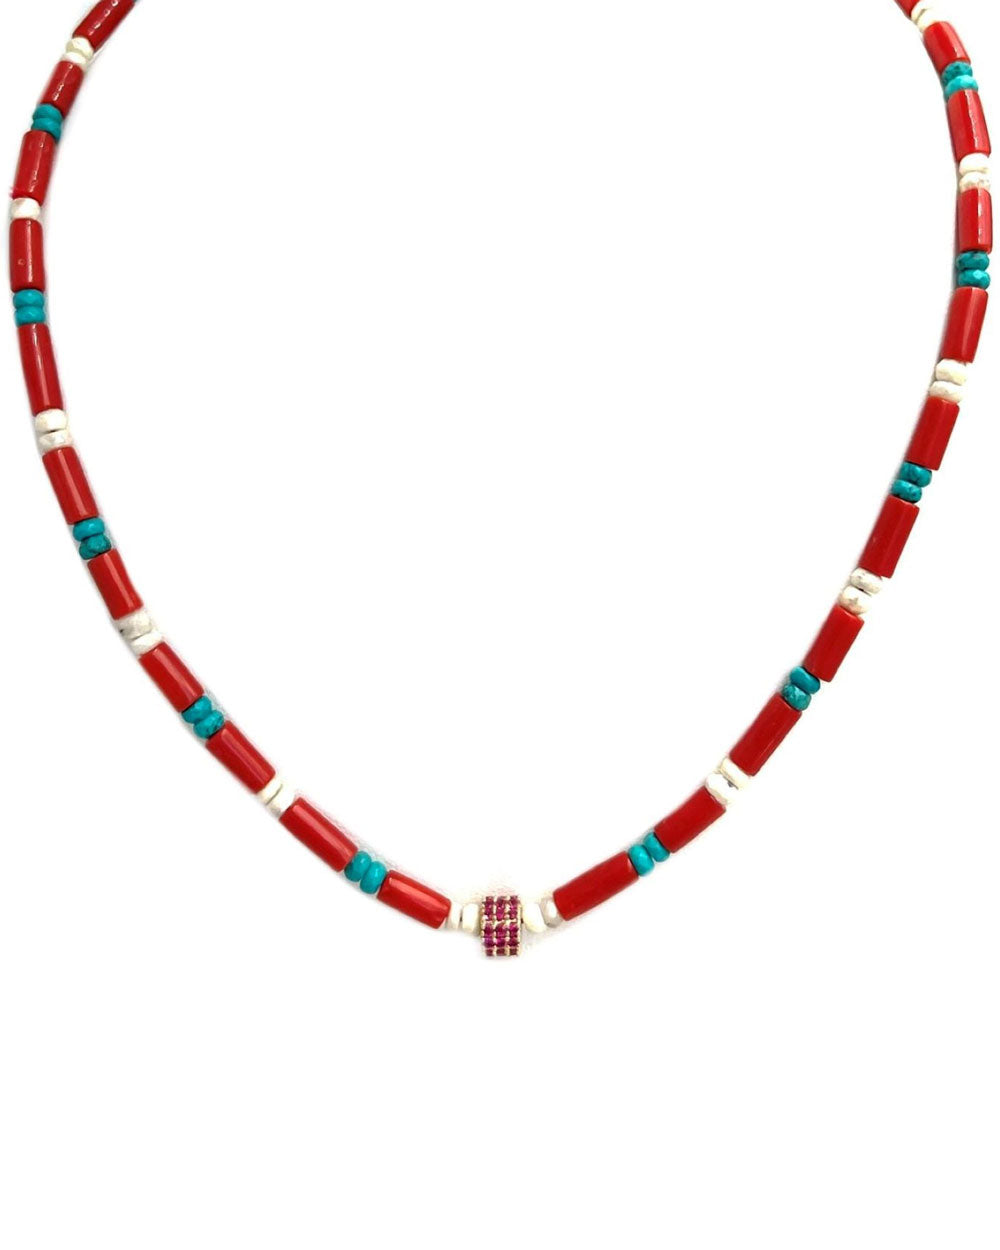 Plated Gold Beaded Strand Necklace with Rubies